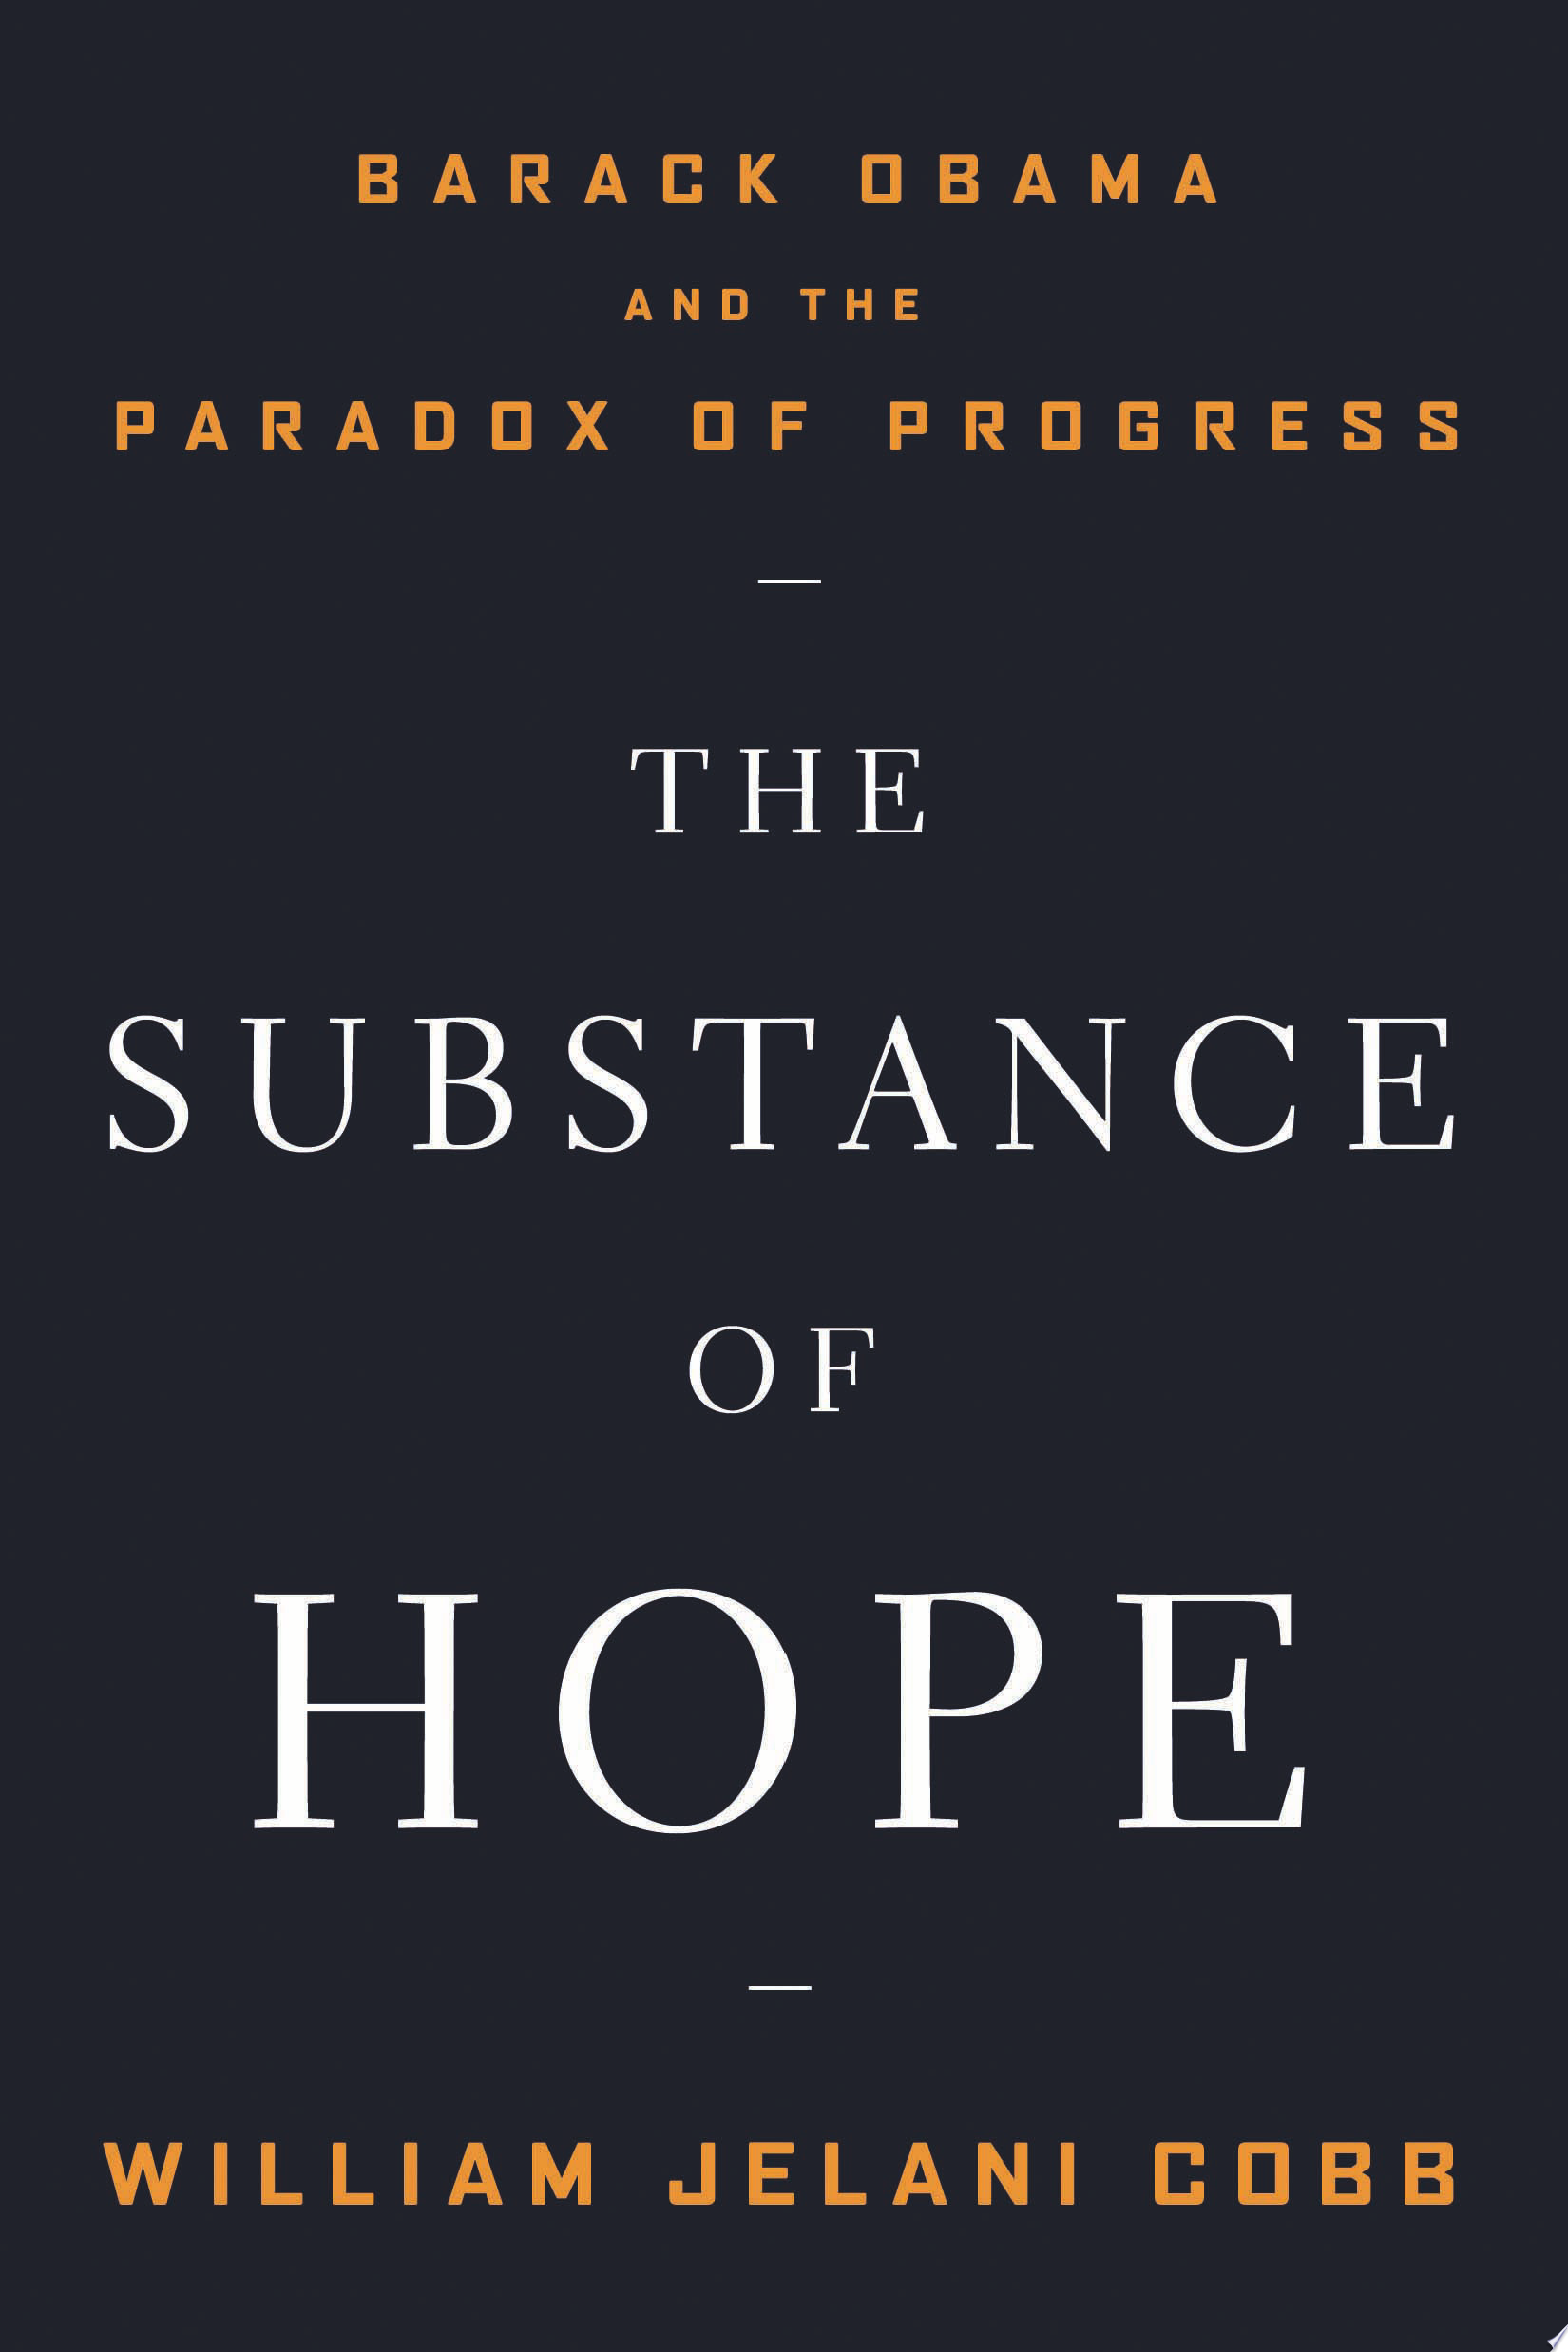 Image for "The Substance of Hope: Barack Obama and the paradox of progress"